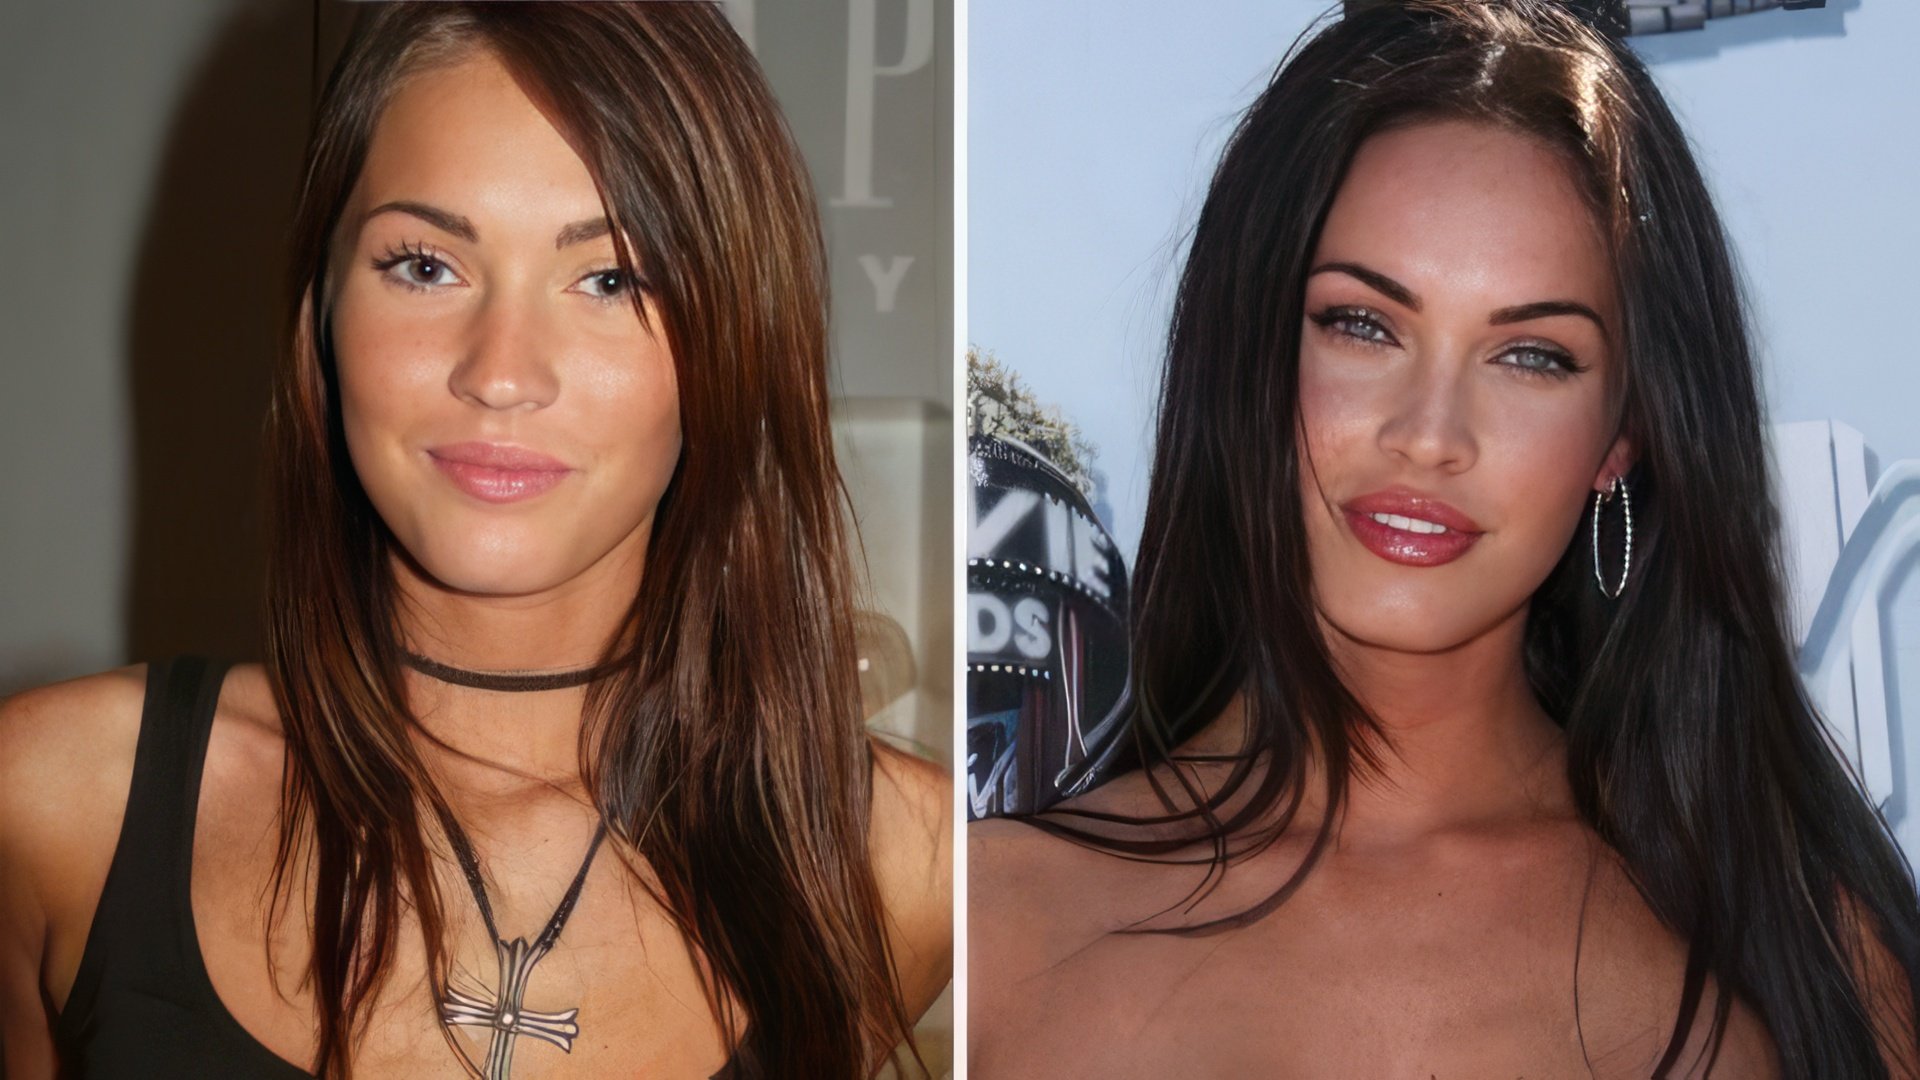 Megan Fox before and after the plastic surgery